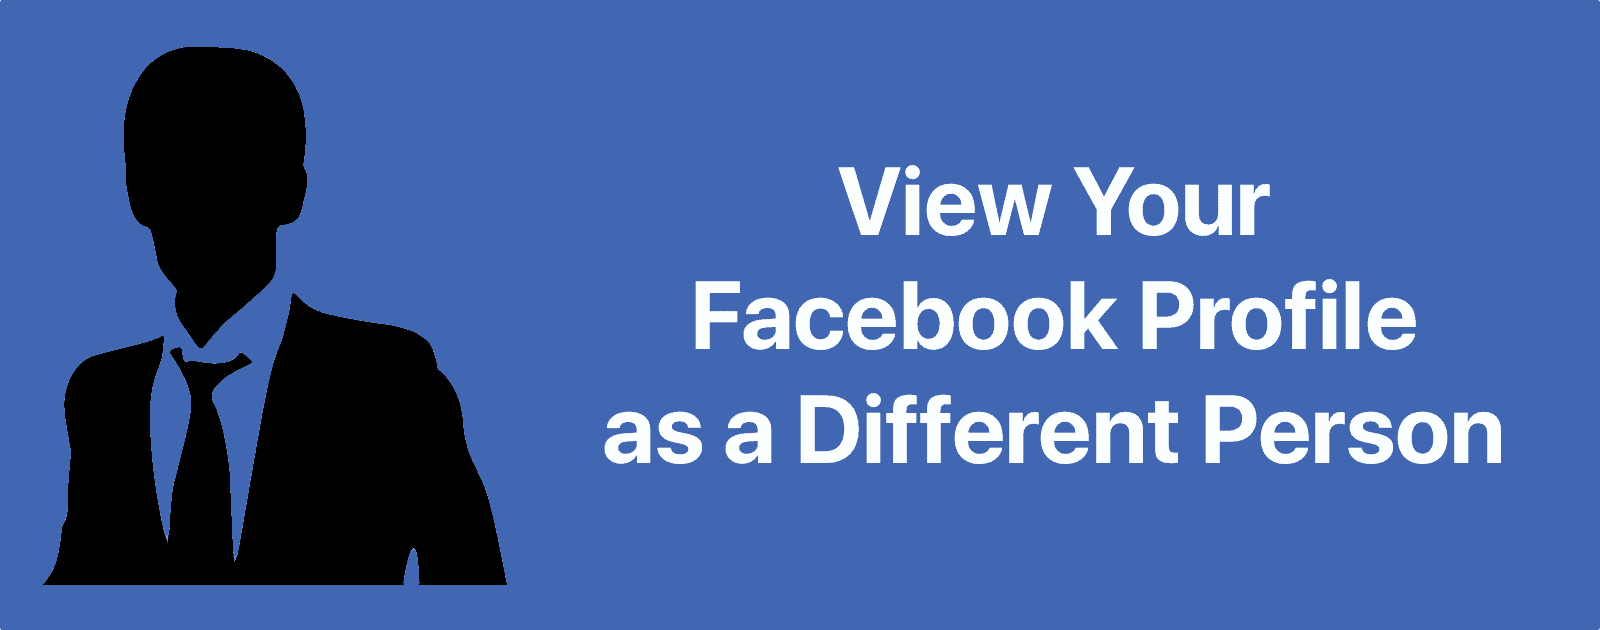 Test Your Facebook Privacy by Viewing Your Profile as a Different Person